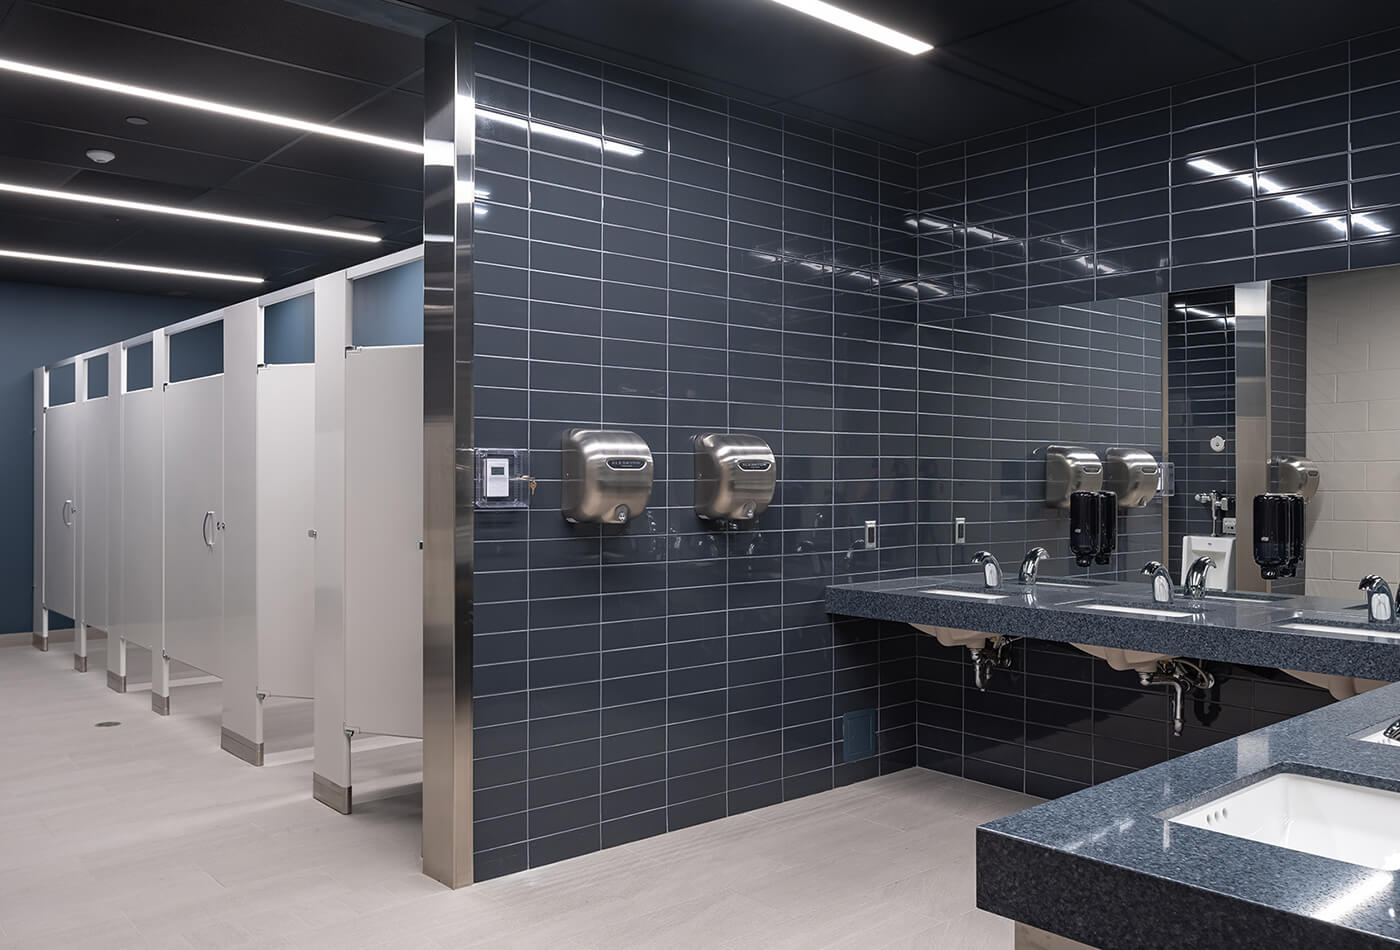 Styling a School Communal Bathrooms with Natural Stones for Safety and Beauty